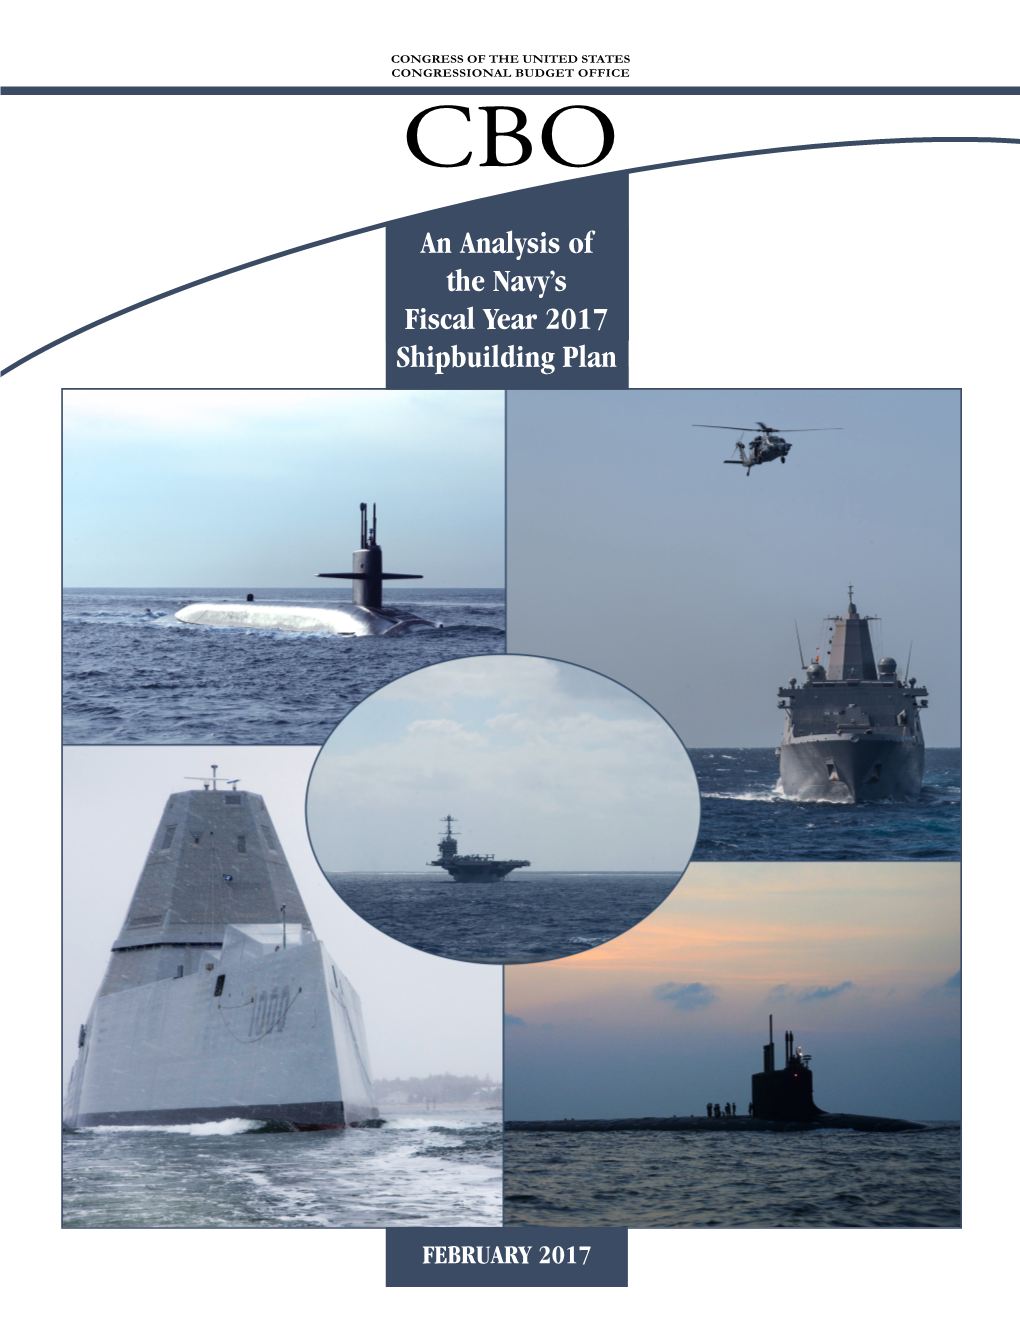 An Analysis of the Navy's Fiscal Year 2017 Shipbuilding Plan